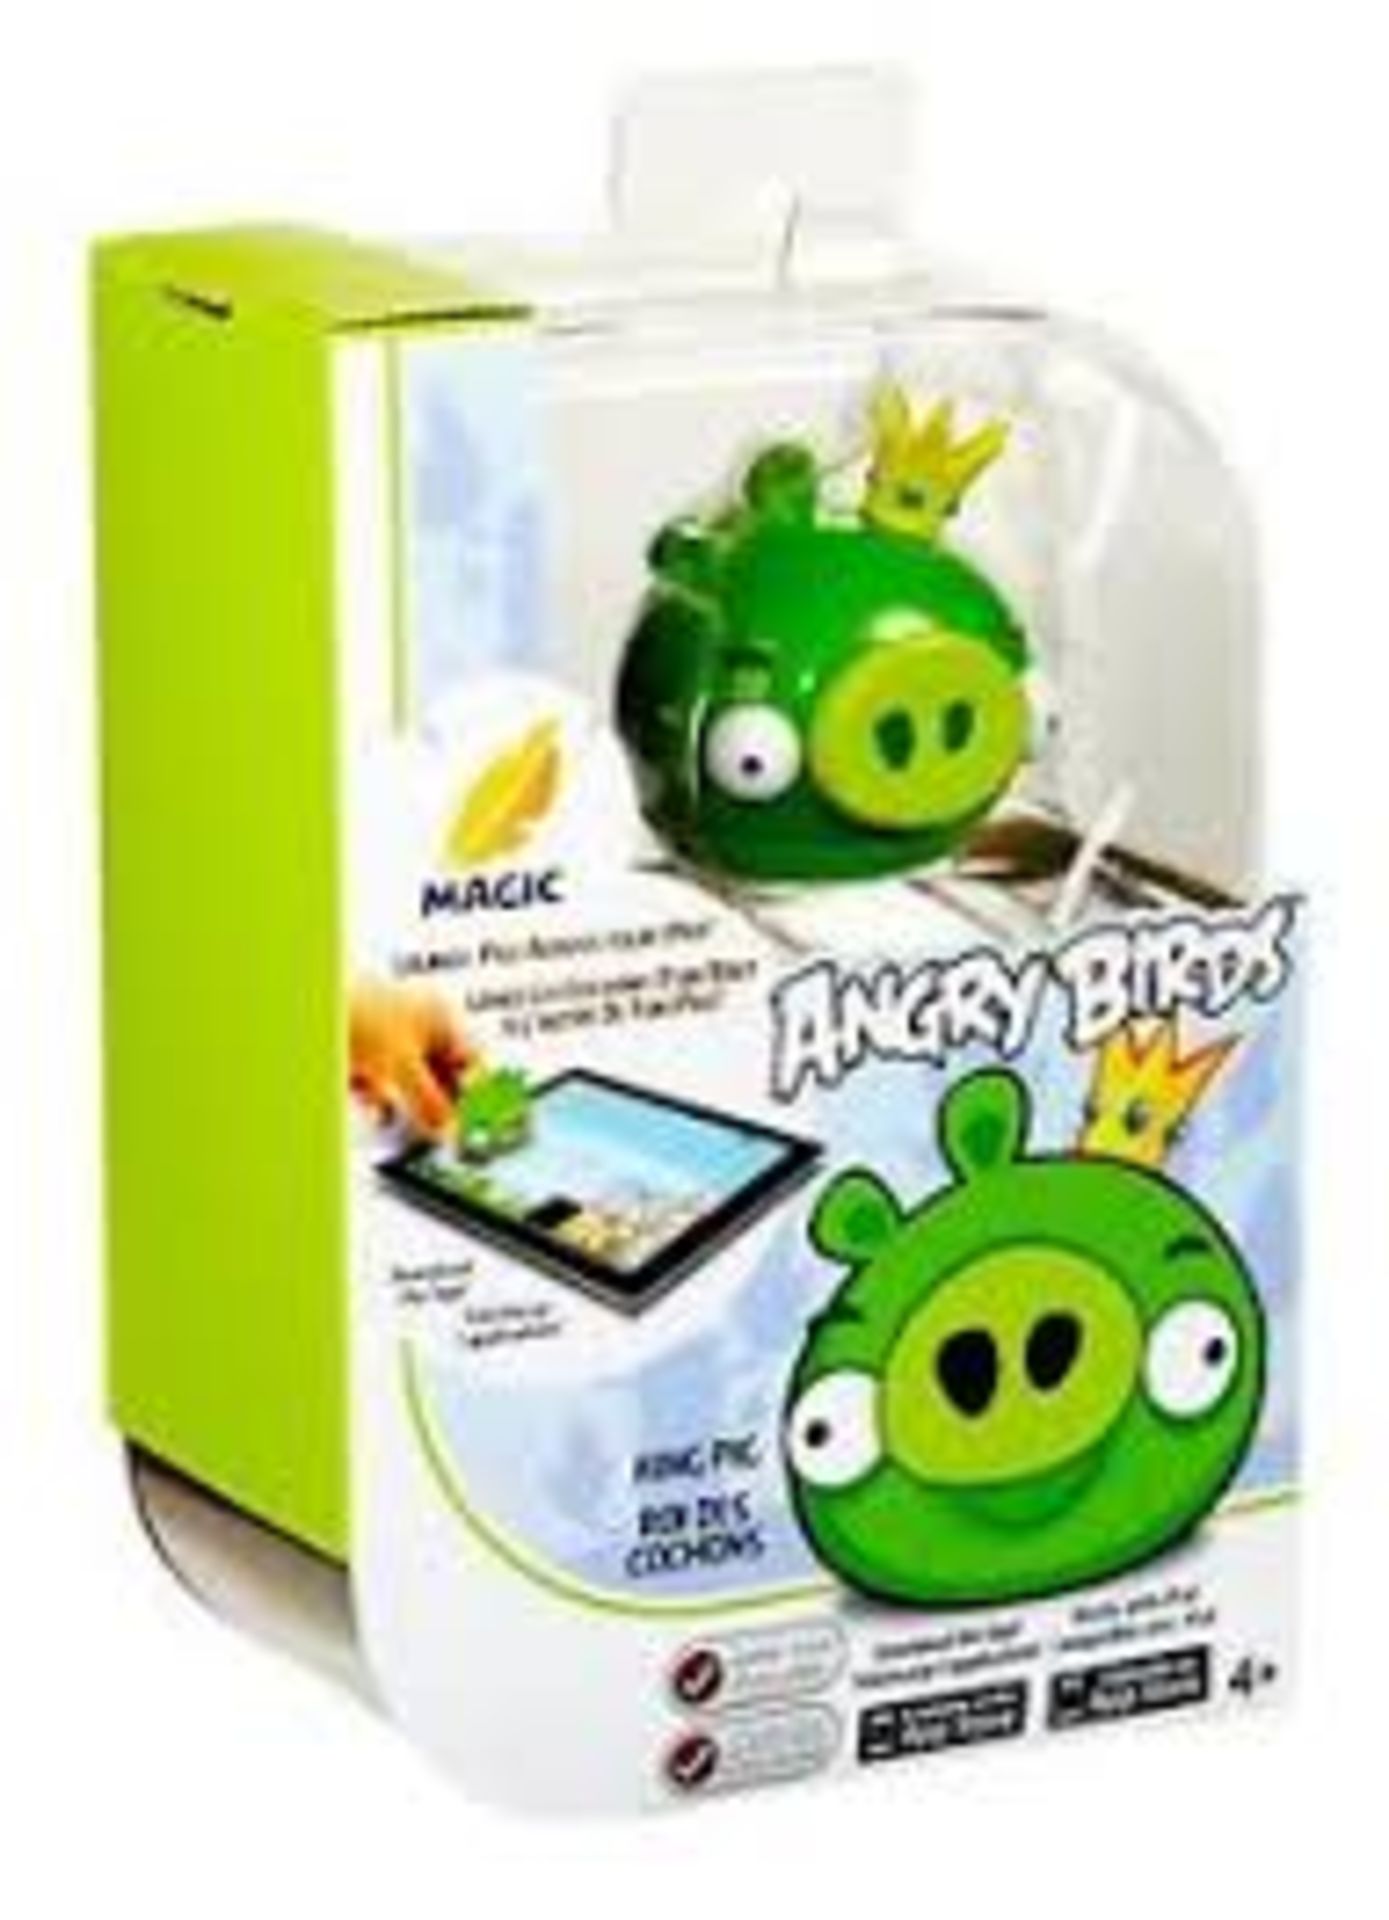 768 x Angry Birds products, see listing | RRP £ 5953.32 - Image 2 of 3